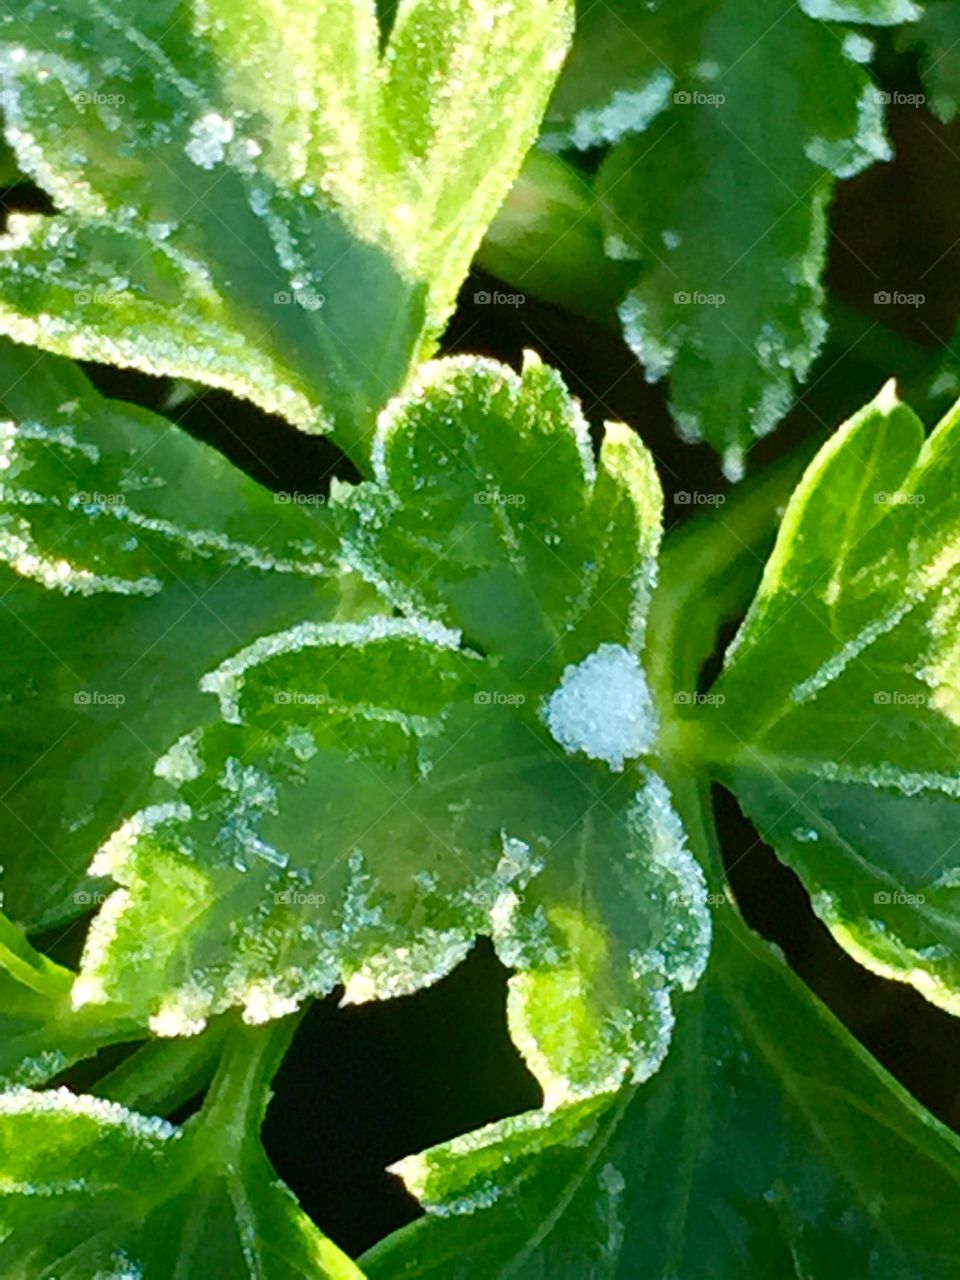 Frost on a parsley